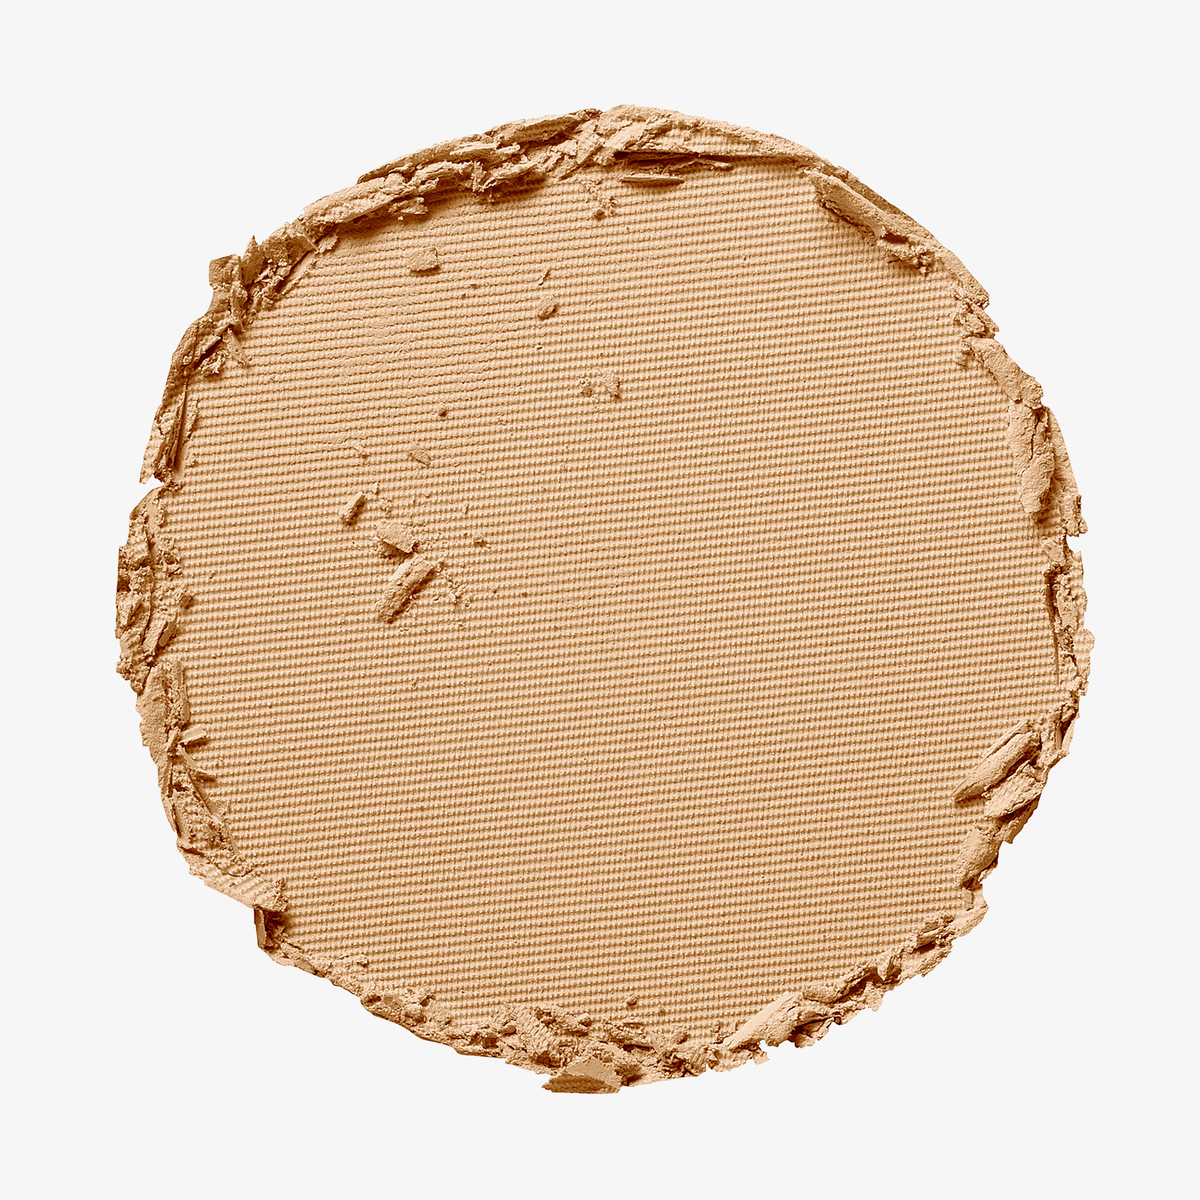 Pür Cosmetics | 4-in-1 Pressed Mineral Makeup Bisque